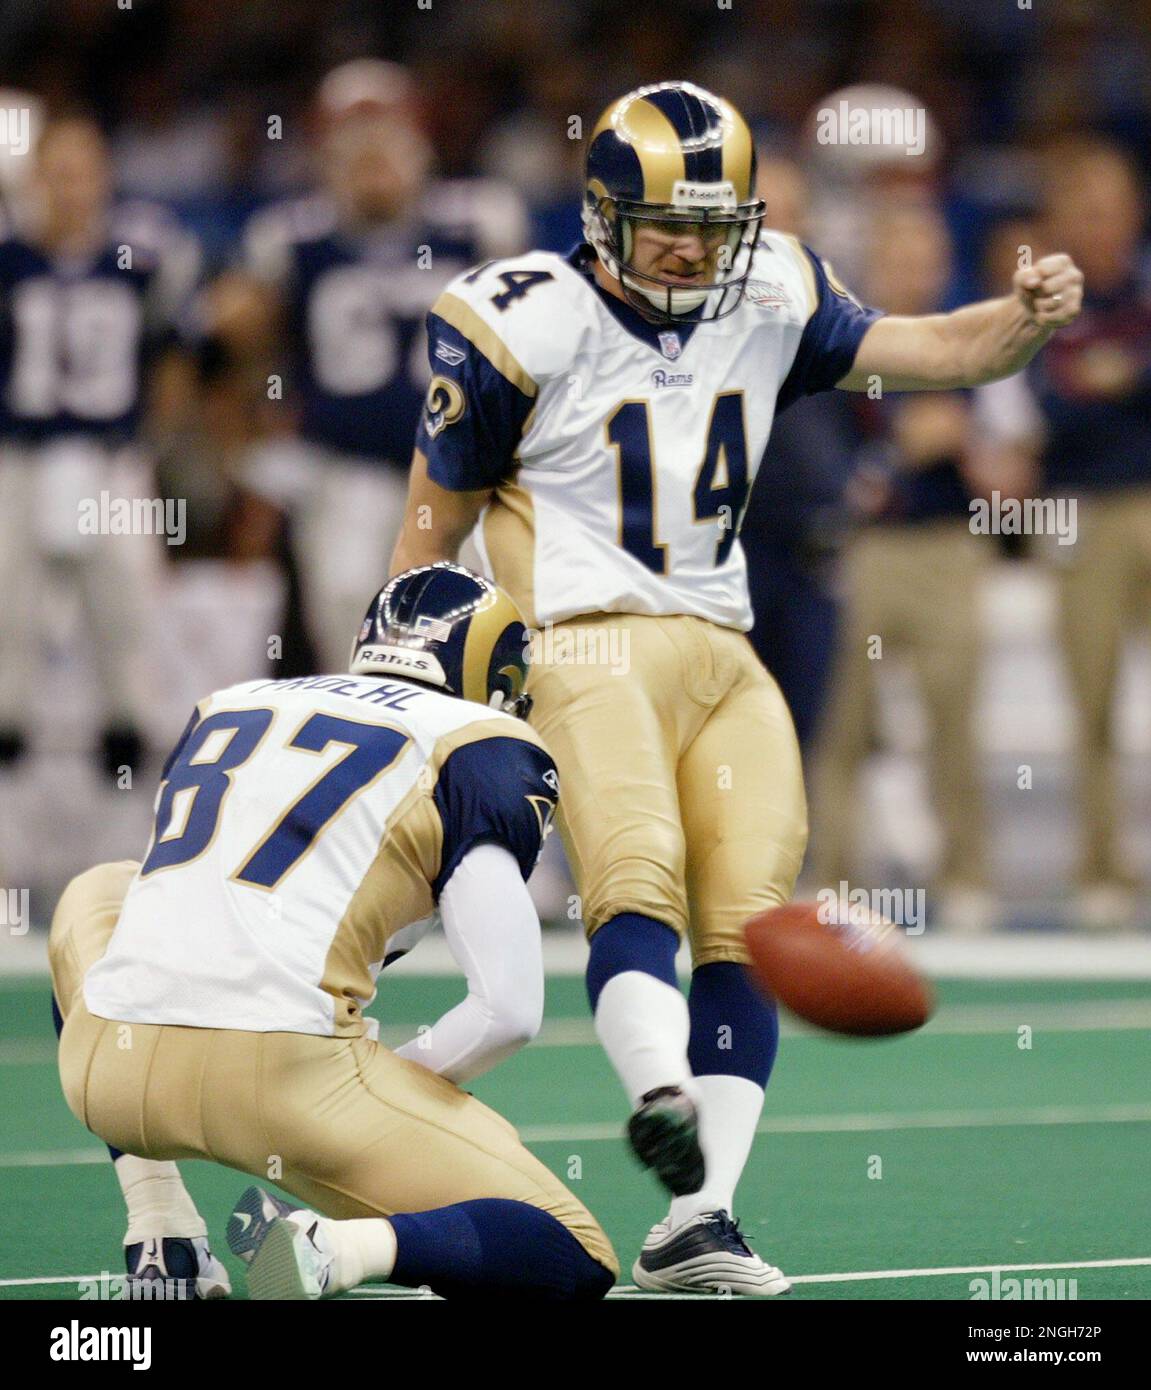 St. Louis Rams kicker Jeff Wilkins (14) boots a 50-yard field goal out of the hold of Ricky Proehl (87) in the first quarter of Super Bowl XXXVI against the New England Patriots Sunday, Feb. 3, 2002, in New Orleans. (AP Photo/Rusty Kennedy) Stock Photo